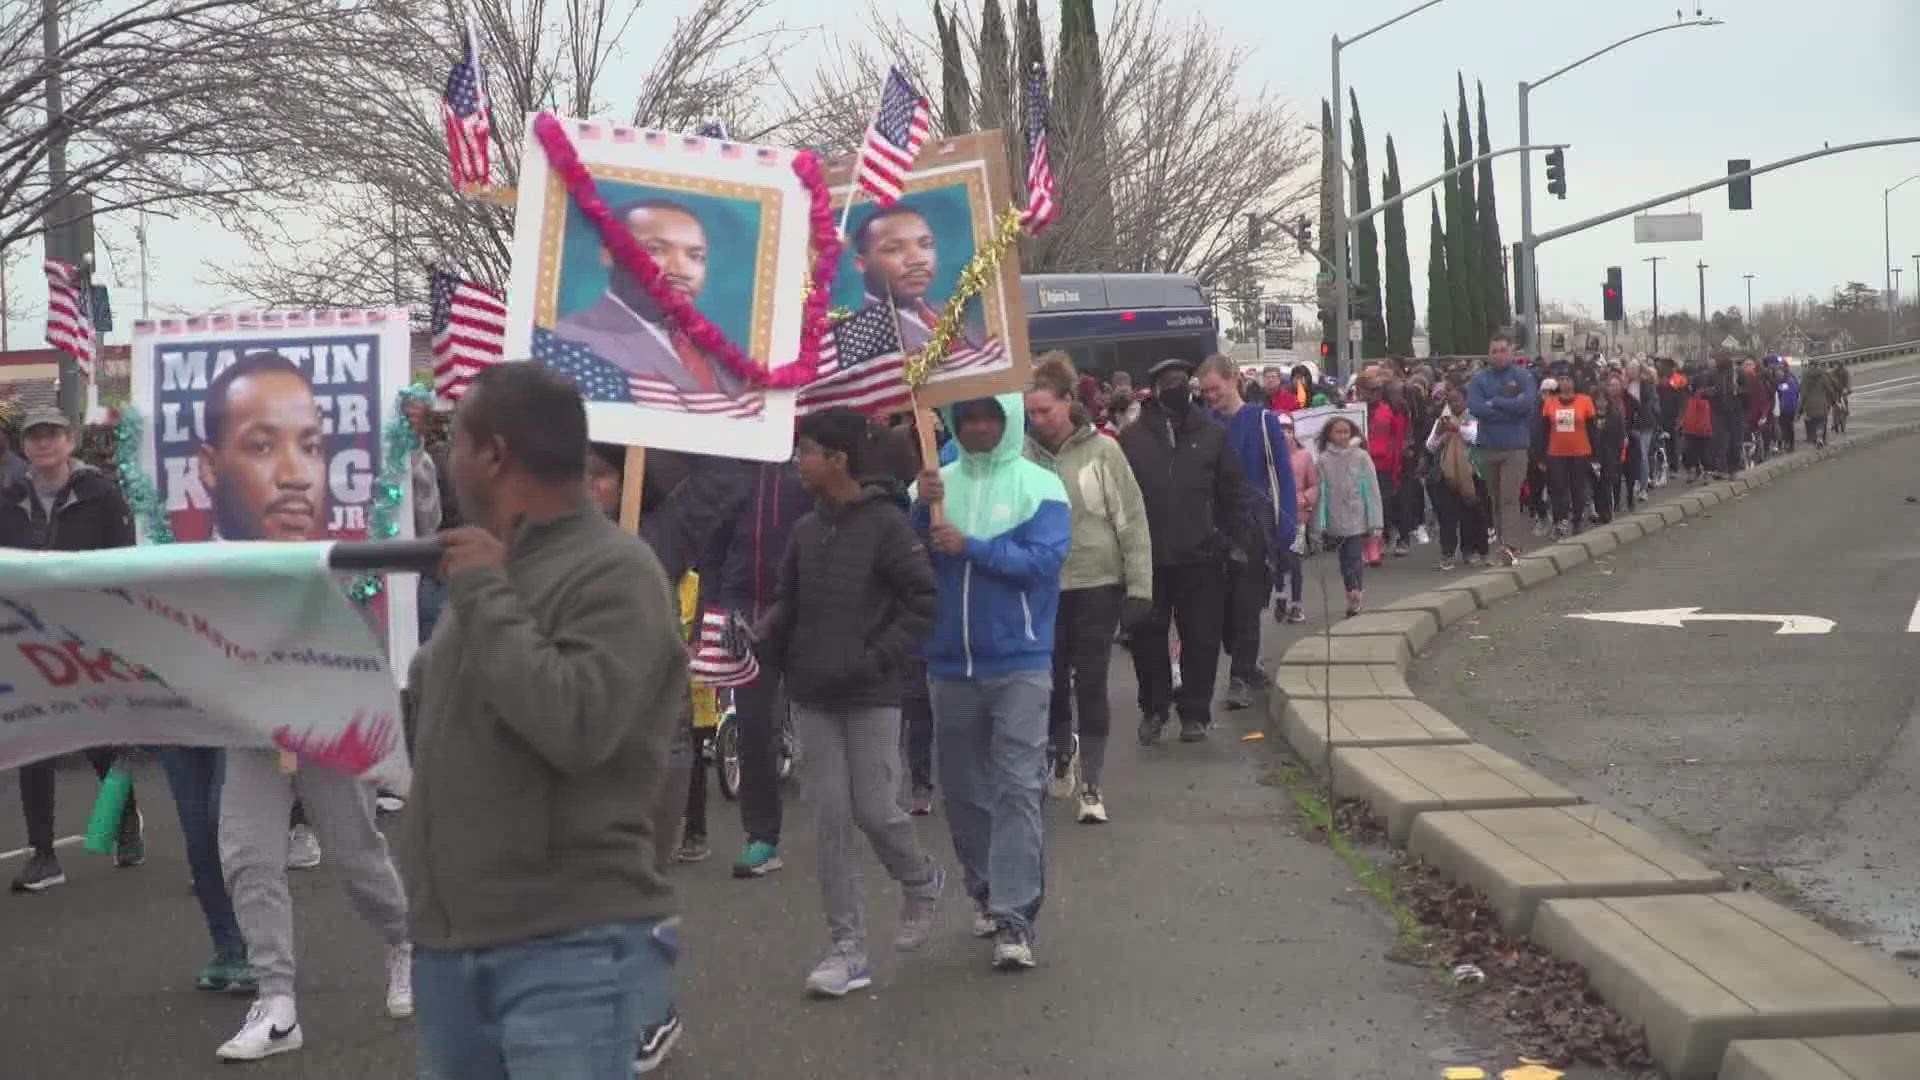 A number of events celebrated Martin Luther King Jr. Day in the Sacramento area.